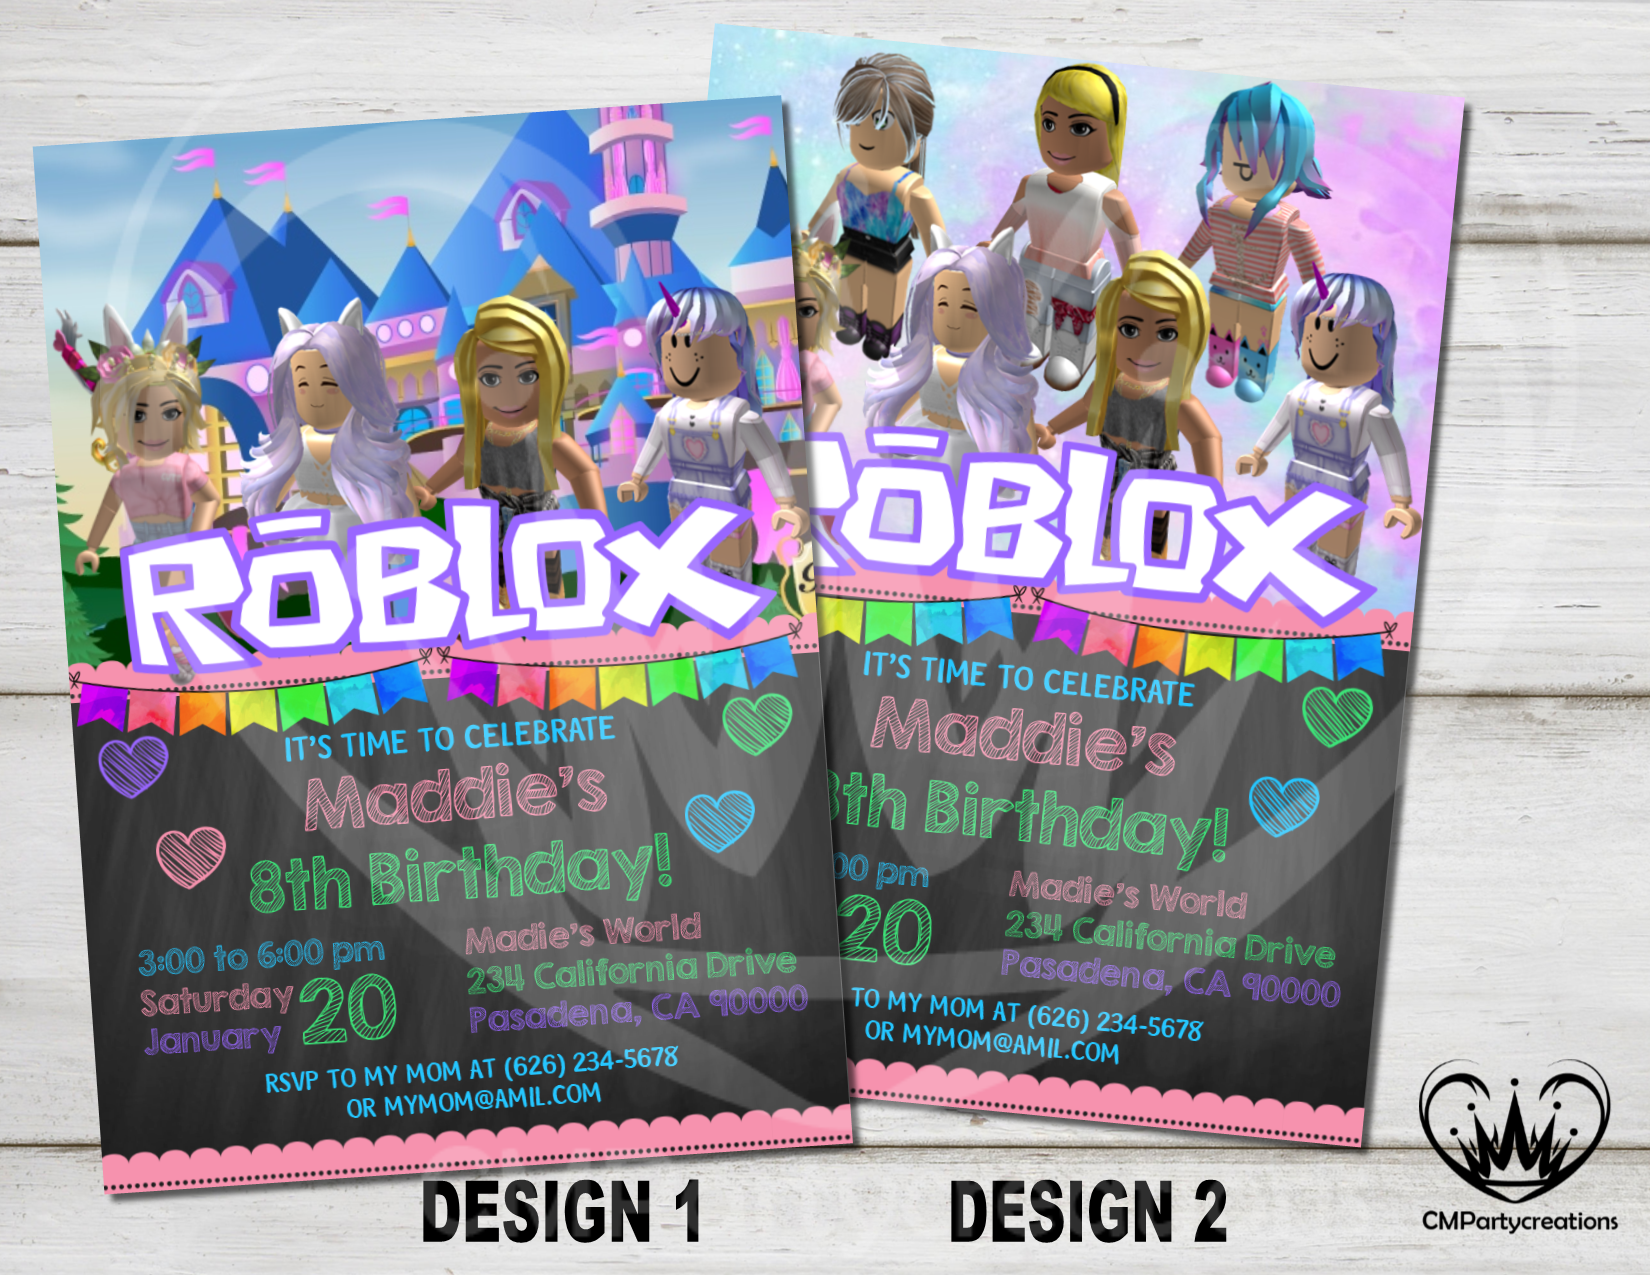 Roblox Invitation Birthday Party Cmpartycreations - jparty roblox